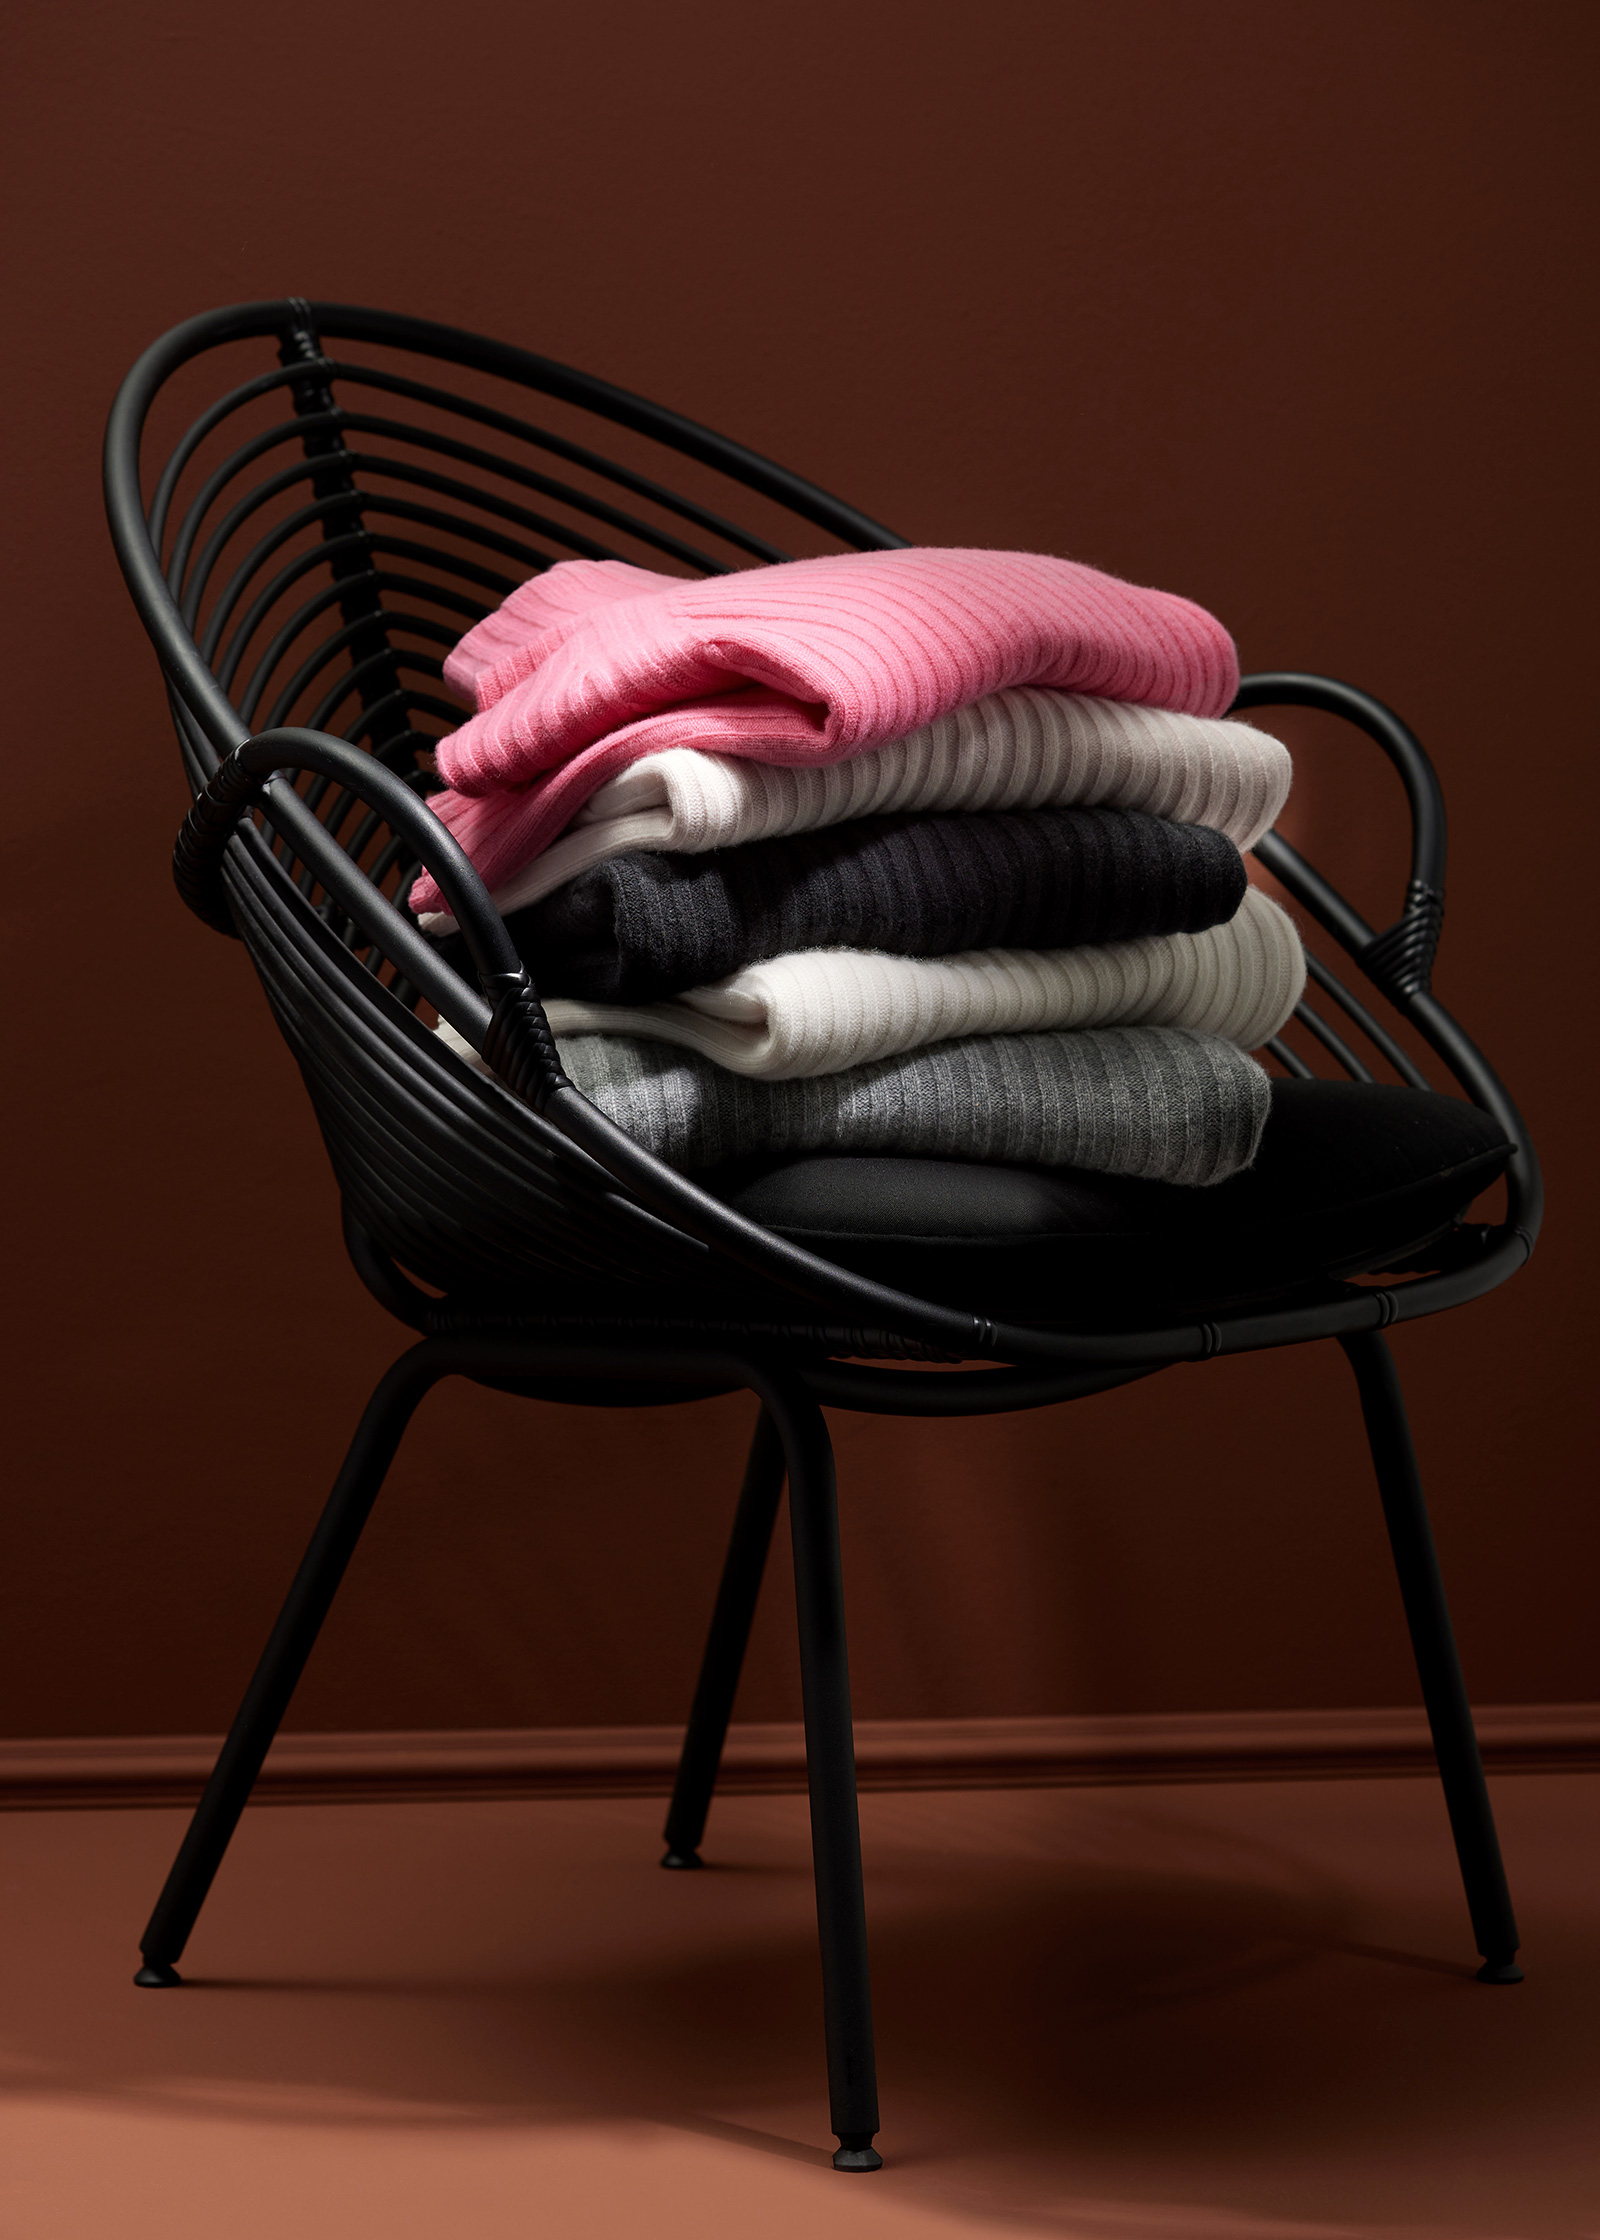 Breuninger Magazin Cashmere 2021, Stilllife, Styling, Photography, StillStyling, Product Styling, Setting up, Props, Concept, Campaign